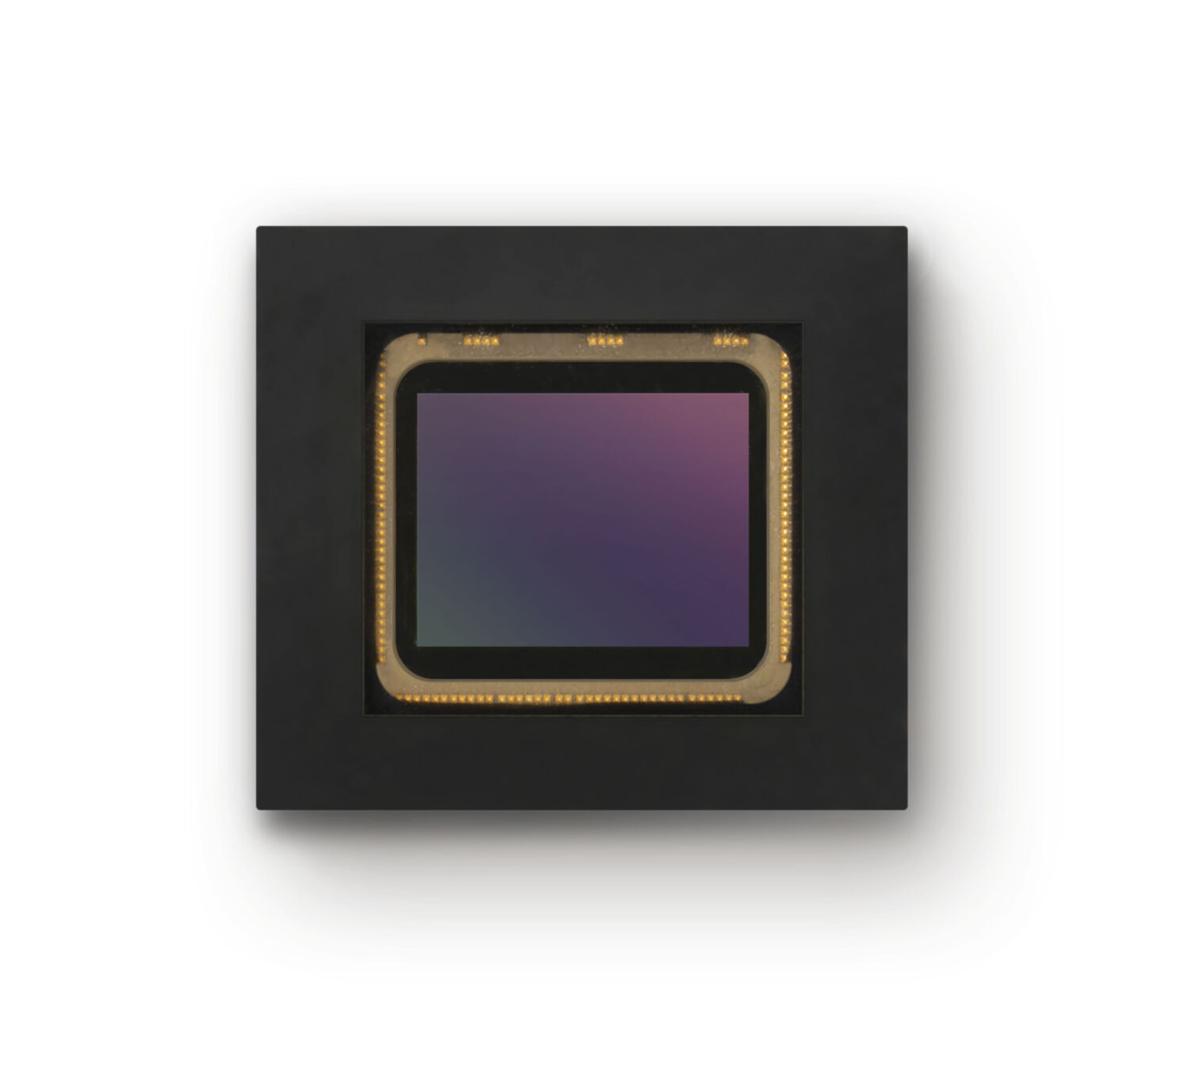 Samsung Introduces Its First Image Sensor for Automotive Applications: ISOCELL Auto 4AC